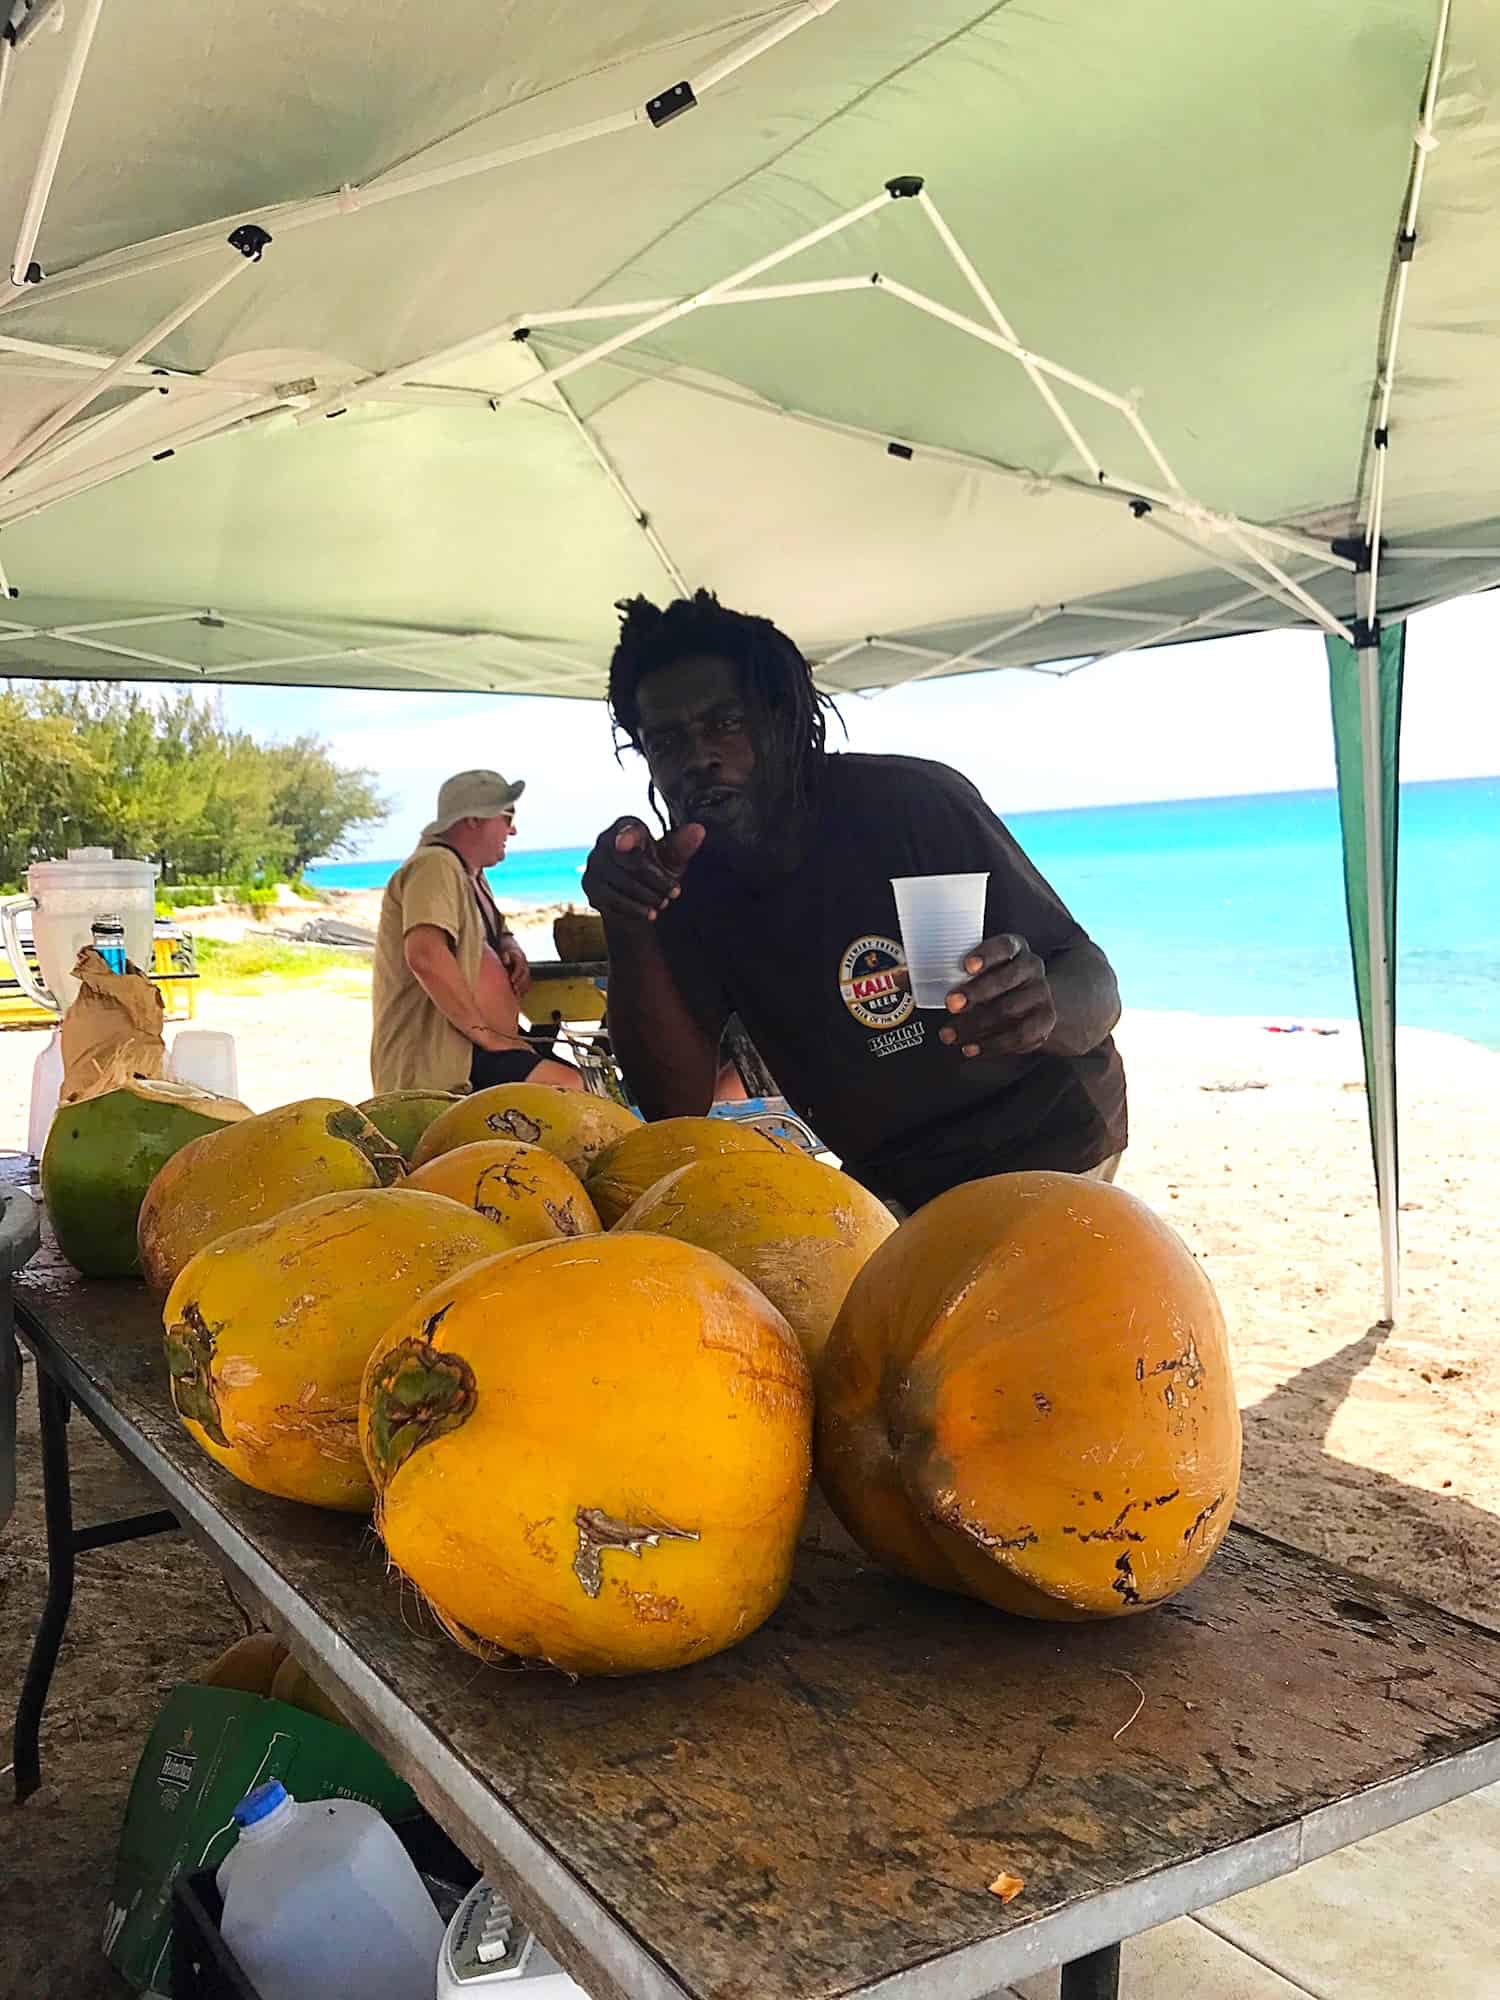 Coconut rum is a beach cocktail specialty served during the abaco regatta time